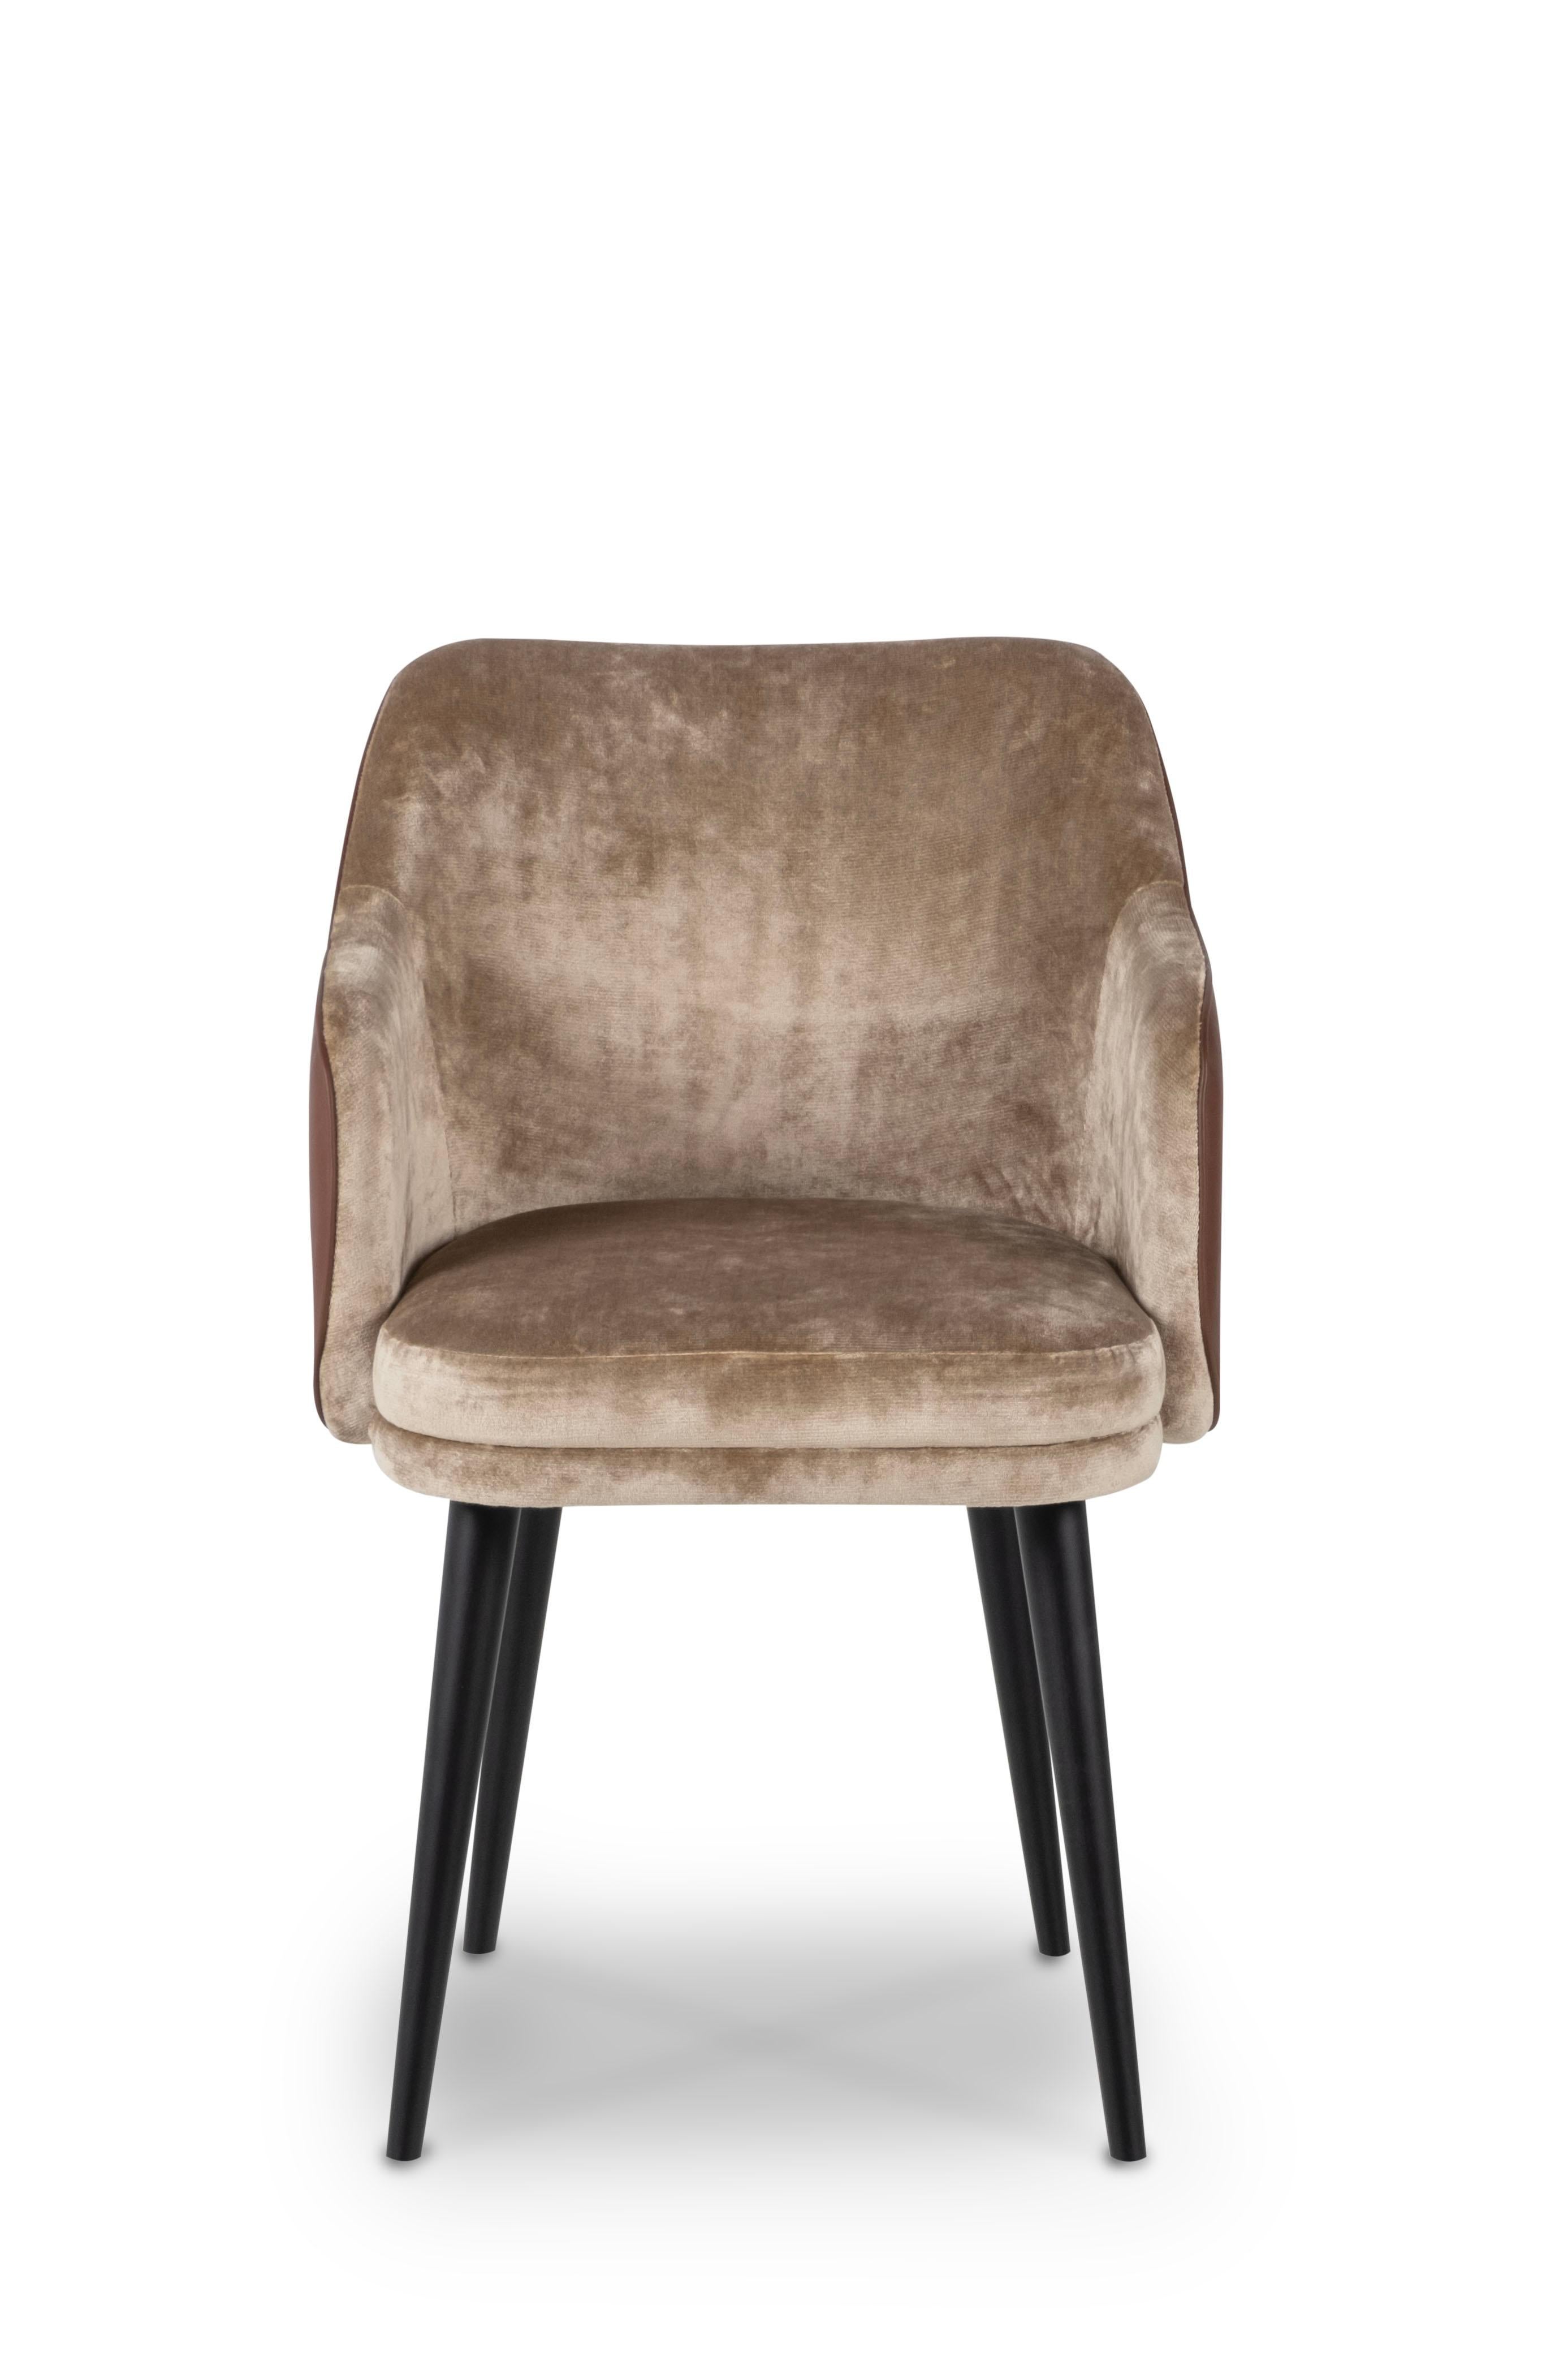 Margot Chair, Modern Collection, Handcrafted in Portugal - Europe by GF Modern.

The Margot leather dining chair stands as a contemporary piece that redefines the standards of modern living. The interplay of soft, graceful lines and premium